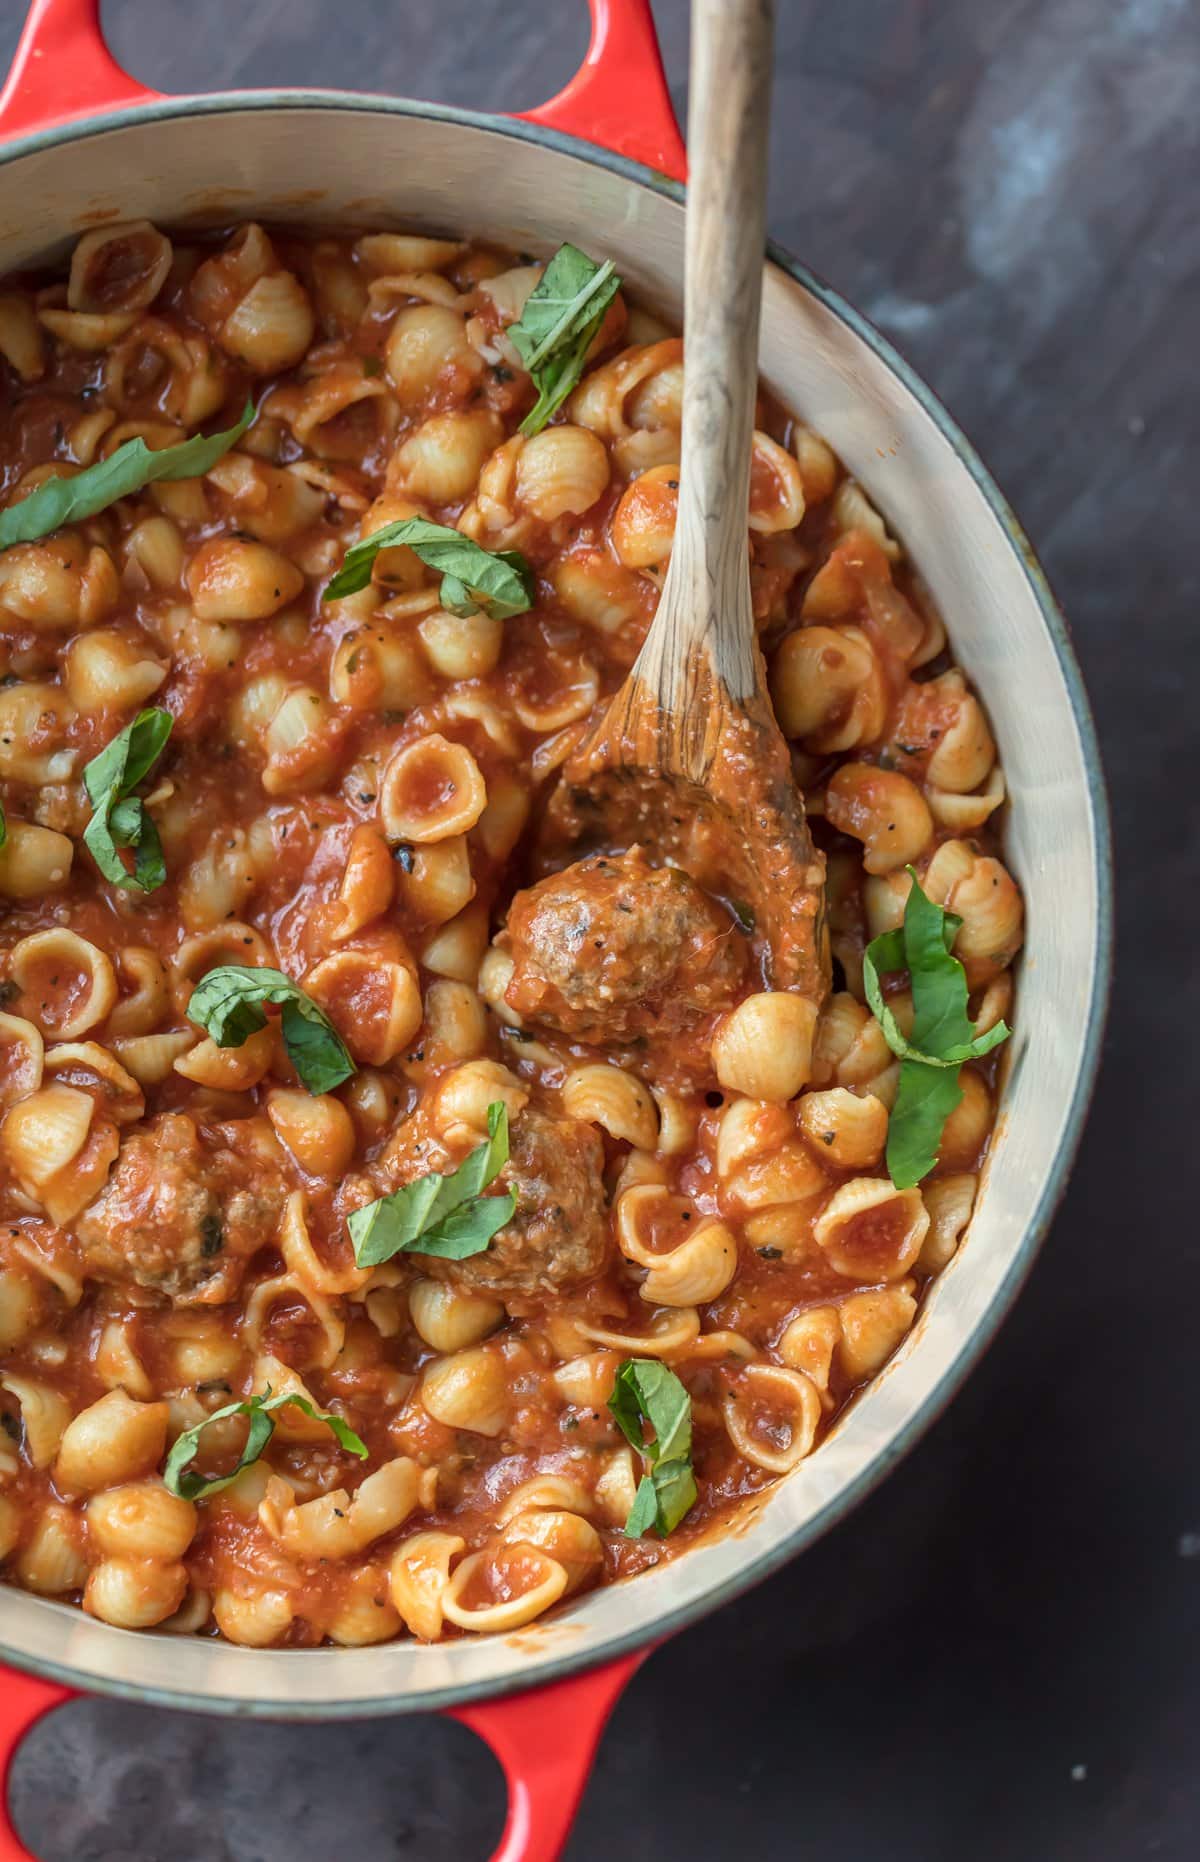 Meatball Parmesan Soup with pasta, parmesan meatballs, and more